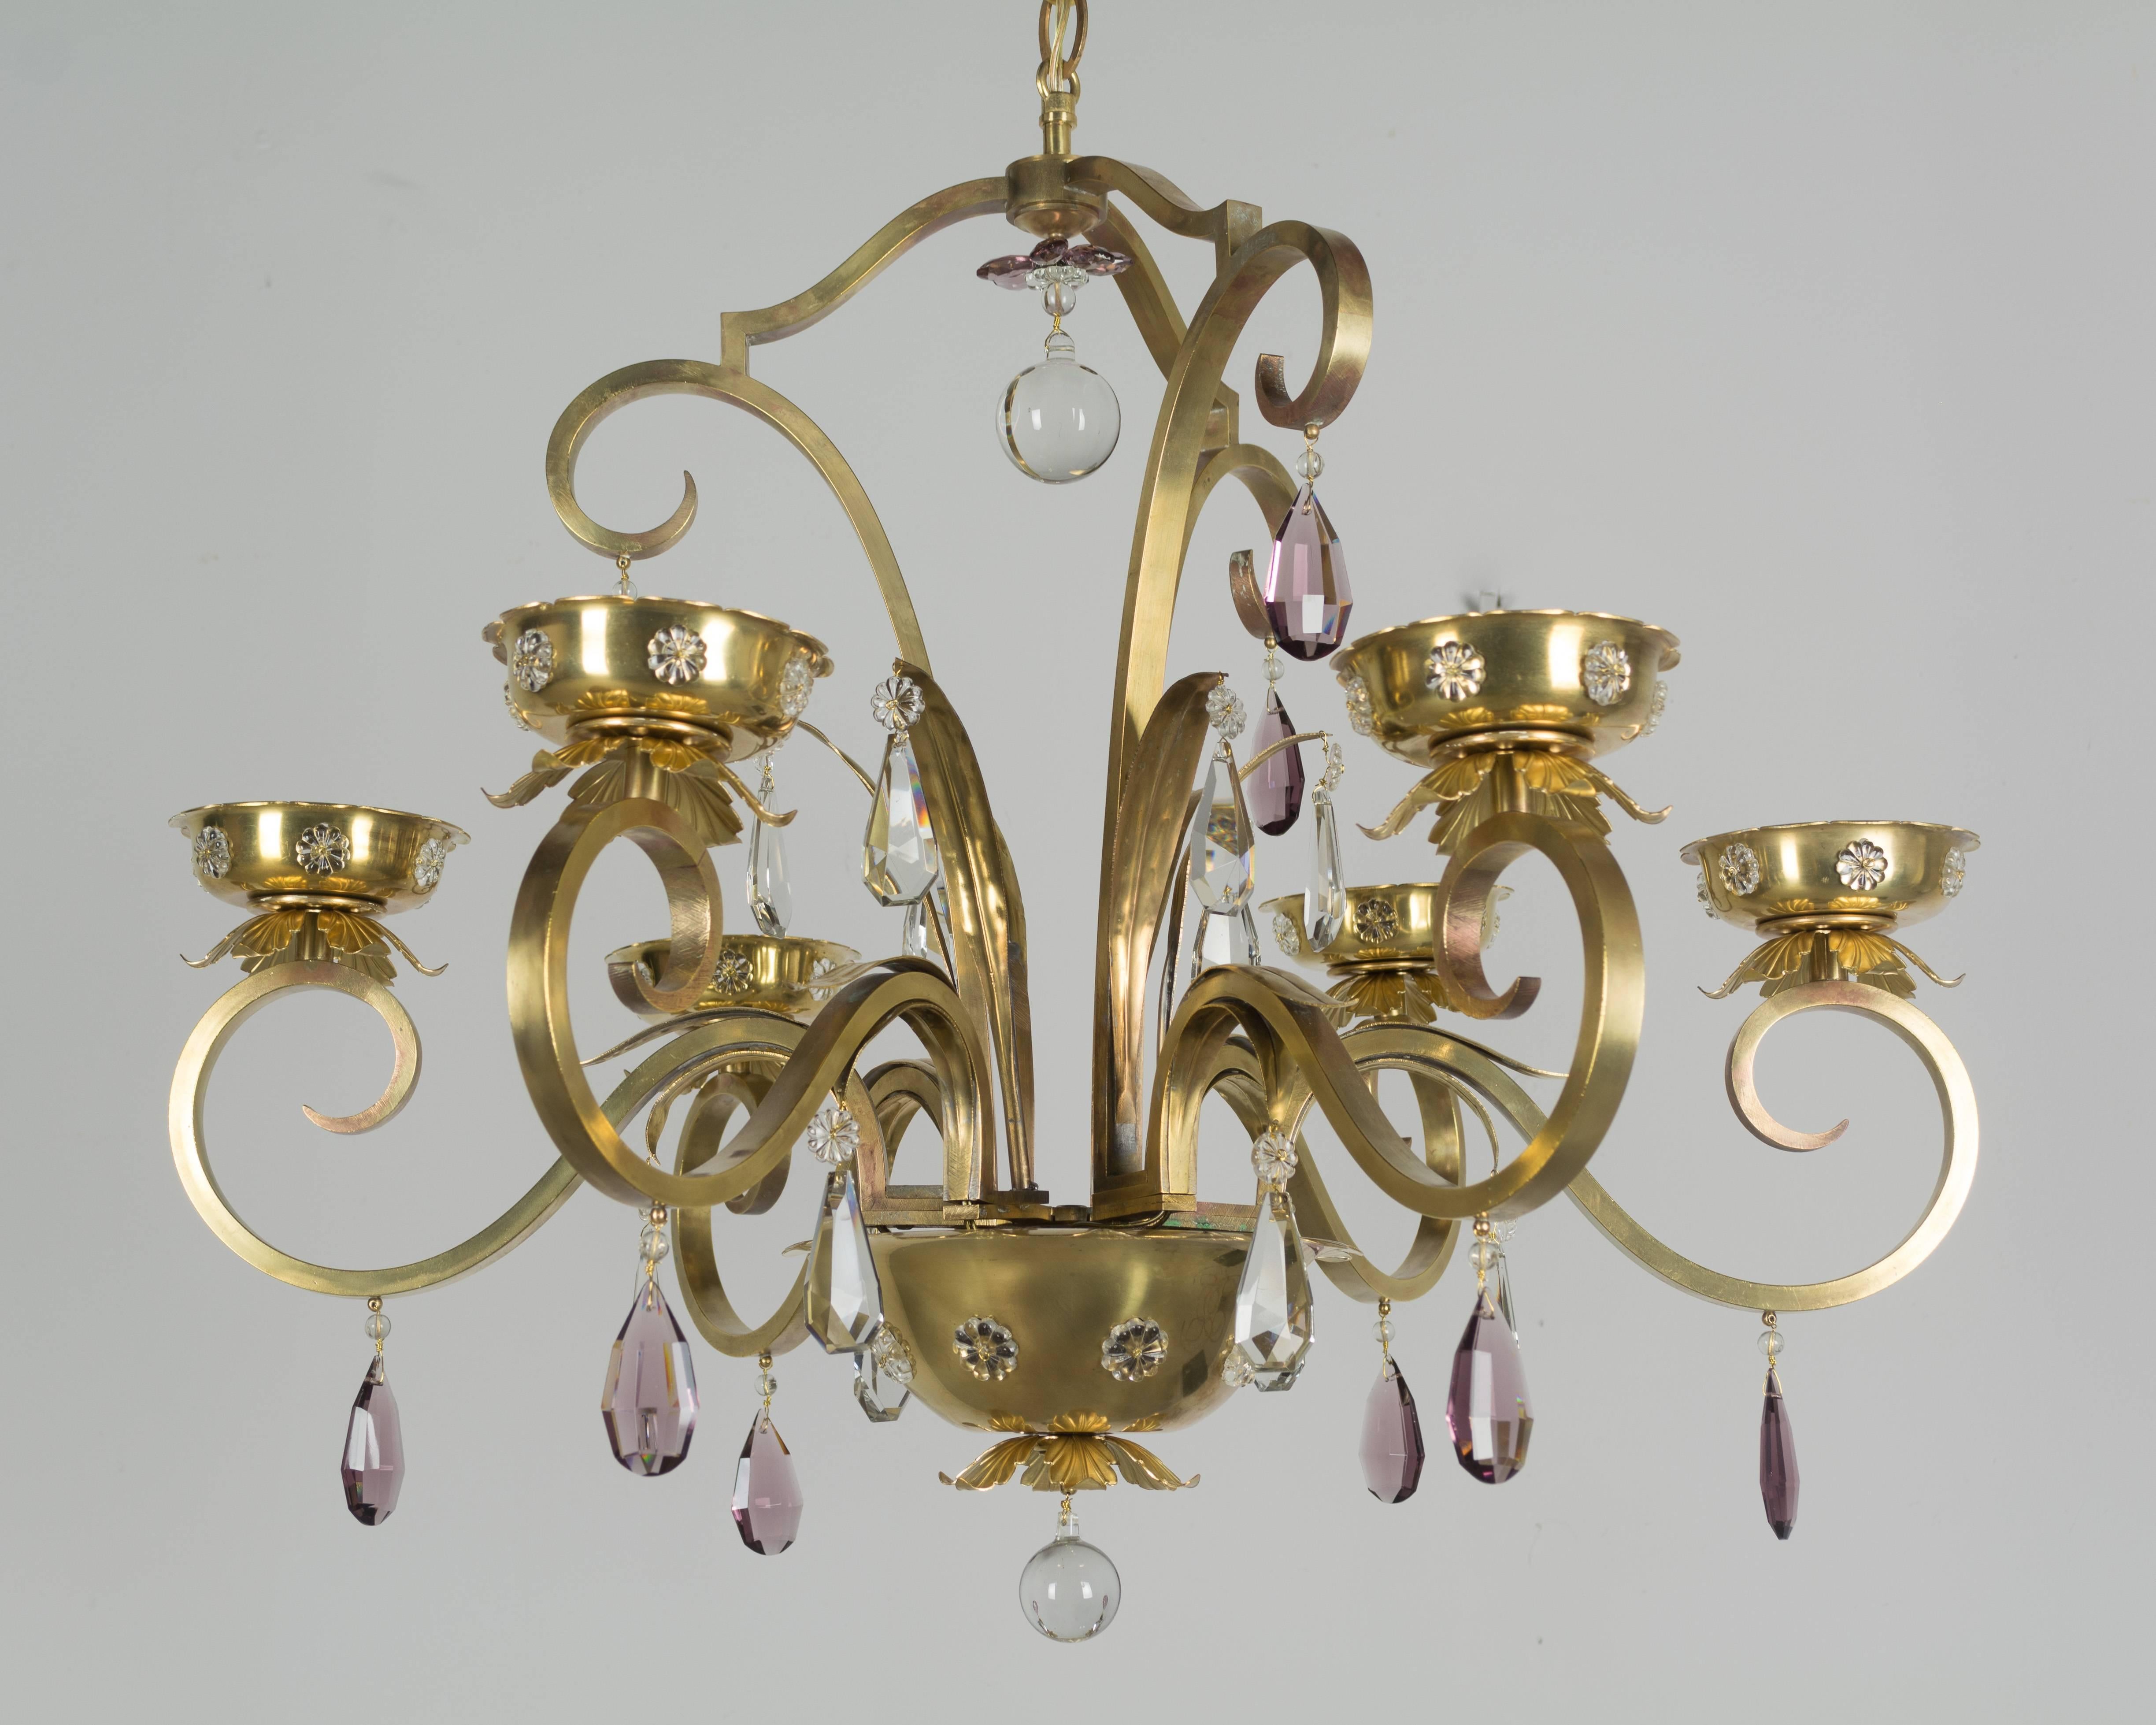 An unusual French Modern six-arm chandelier  style of Maison Jansen. Light shines through perforated brass dome and candle cups creating a dramatic effect when lit. Decorated with clear and amethyst faceted crystal prisms and rosettes. Polished